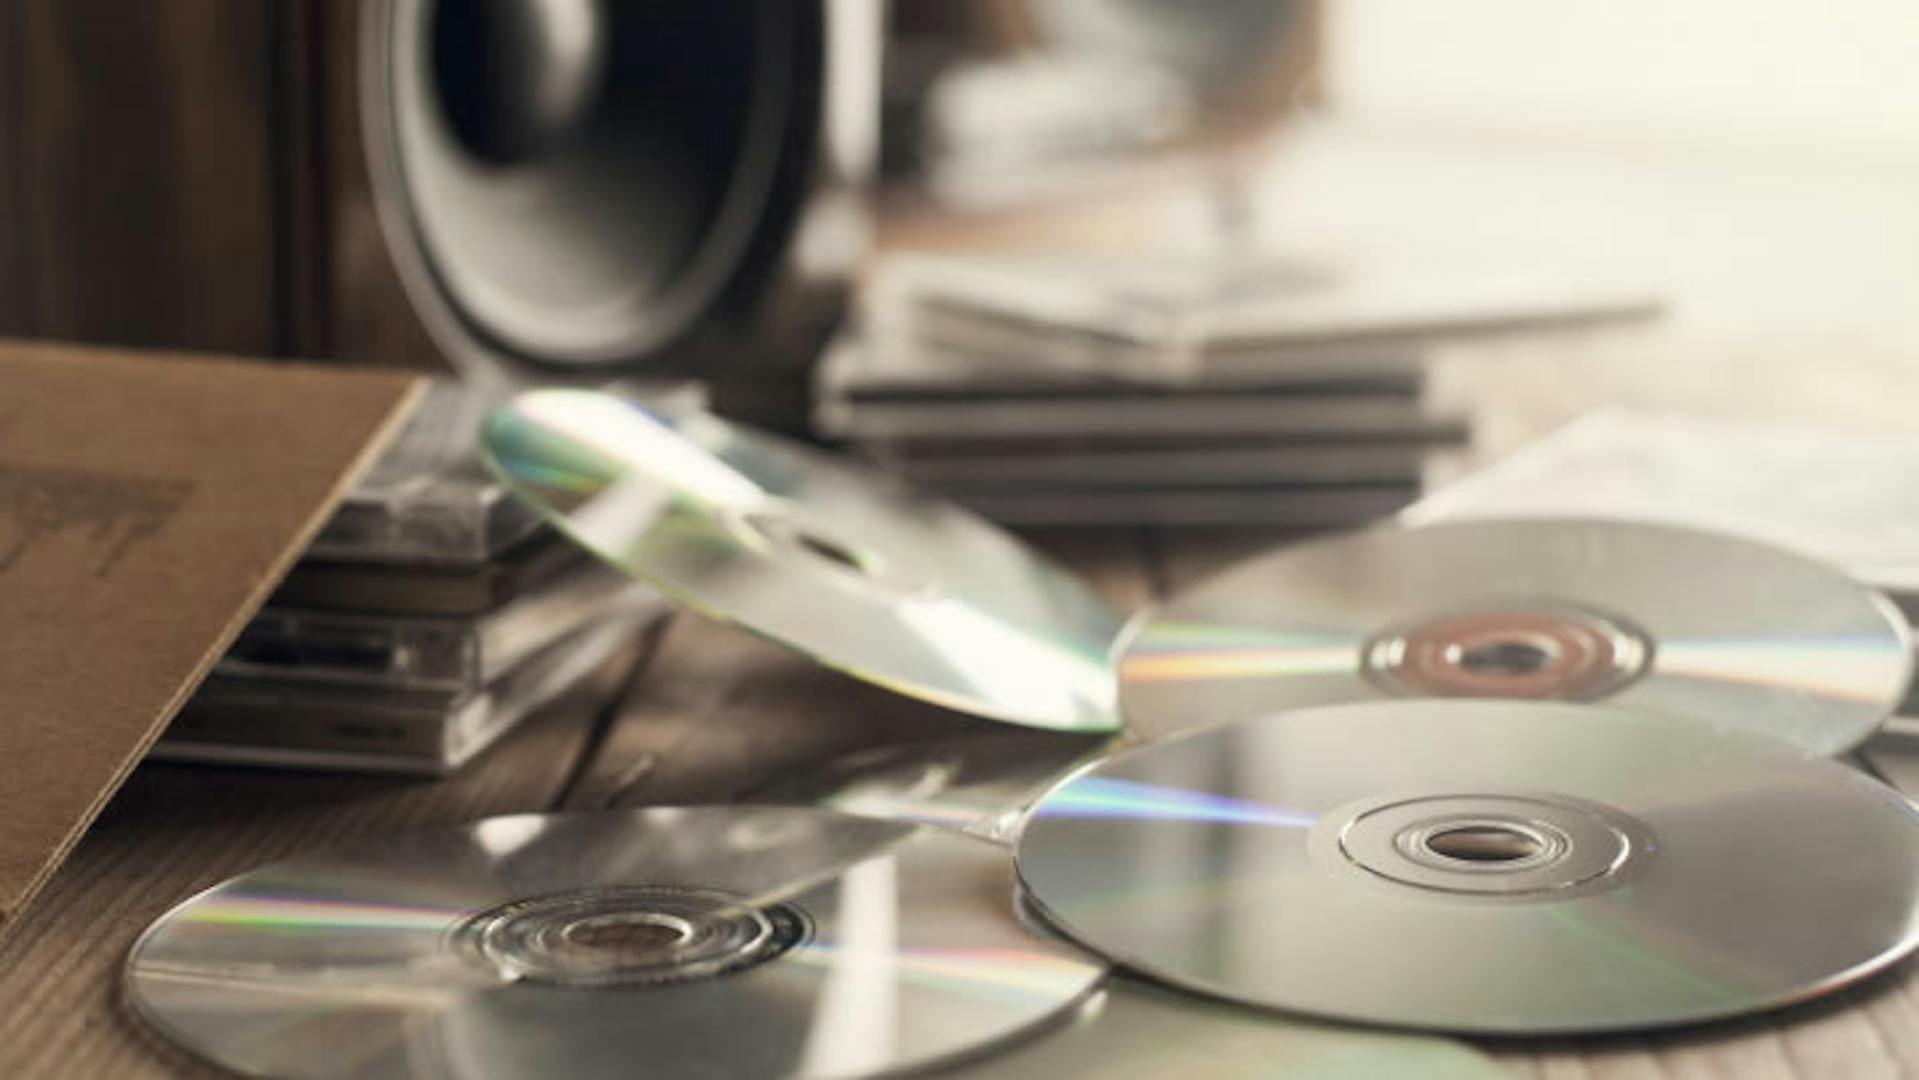 Burning mixes on CDs was the highest form of self-expression in the early days of the internet.